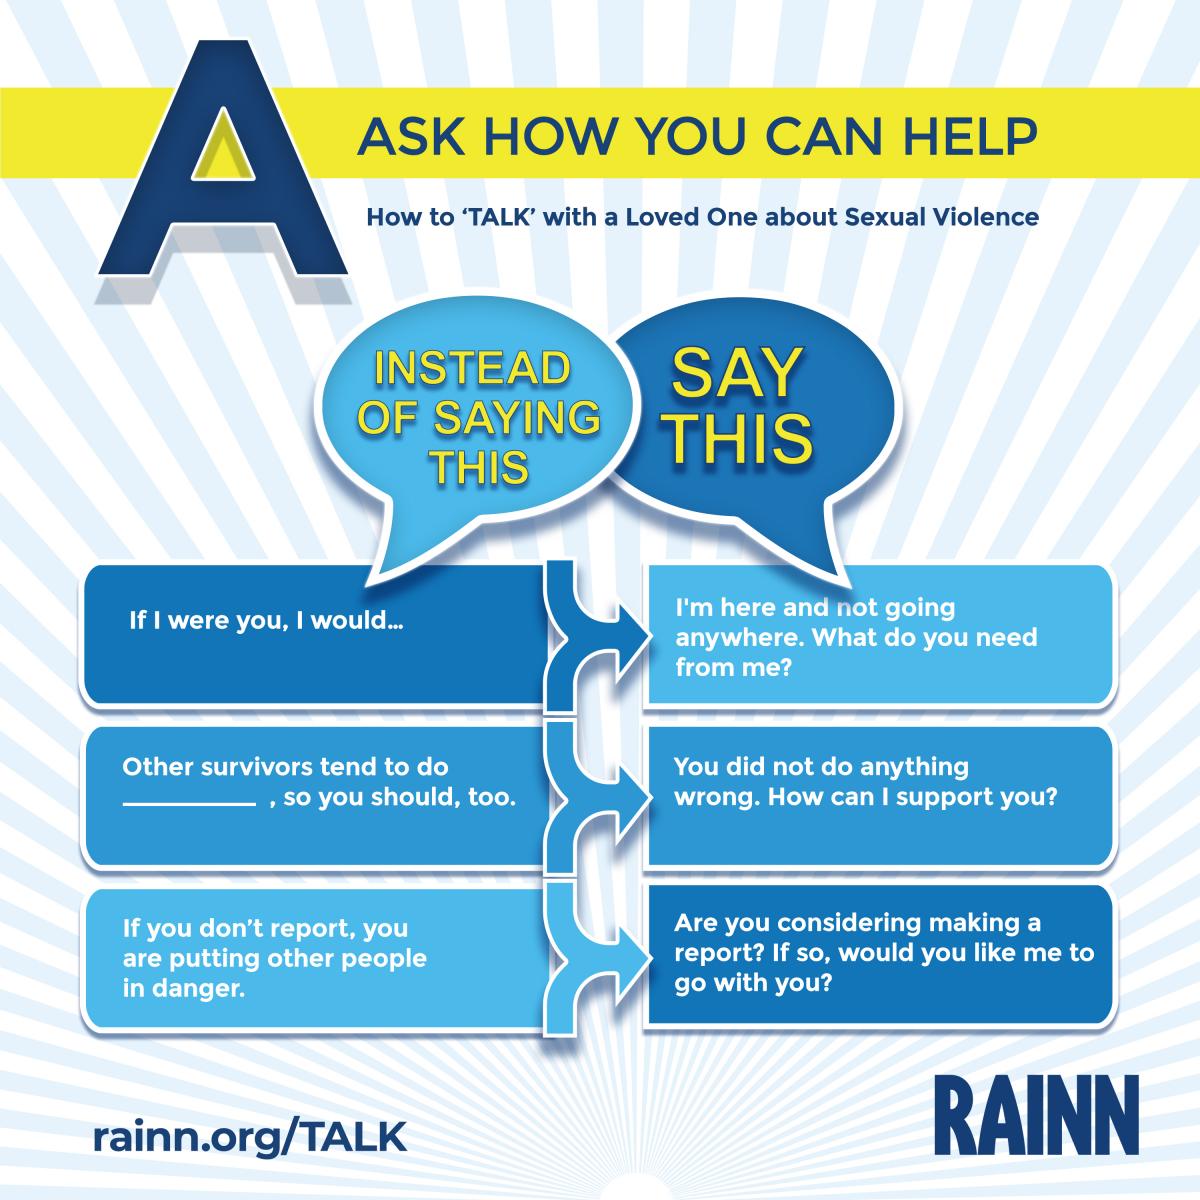 sexual assault and violence talking points from RAINN